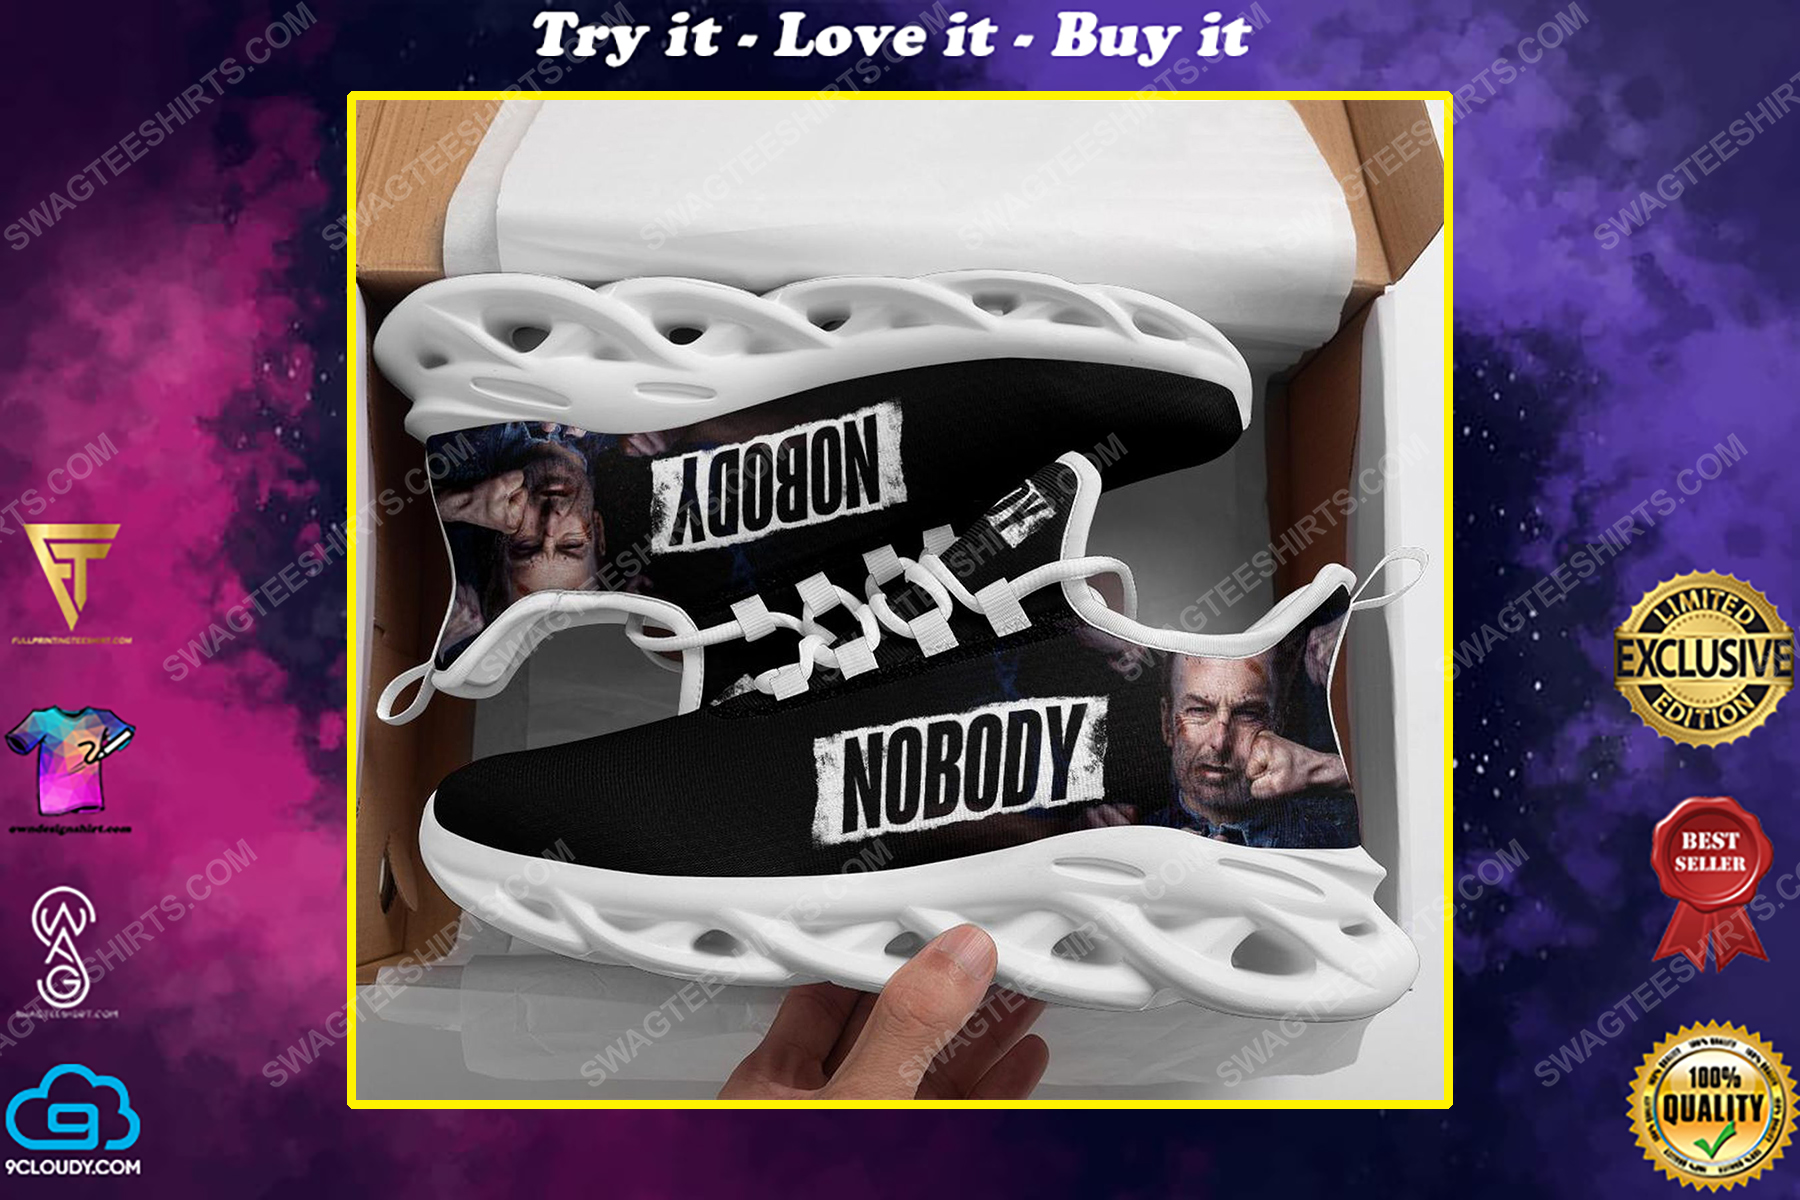 Nobody movie max soul shoes